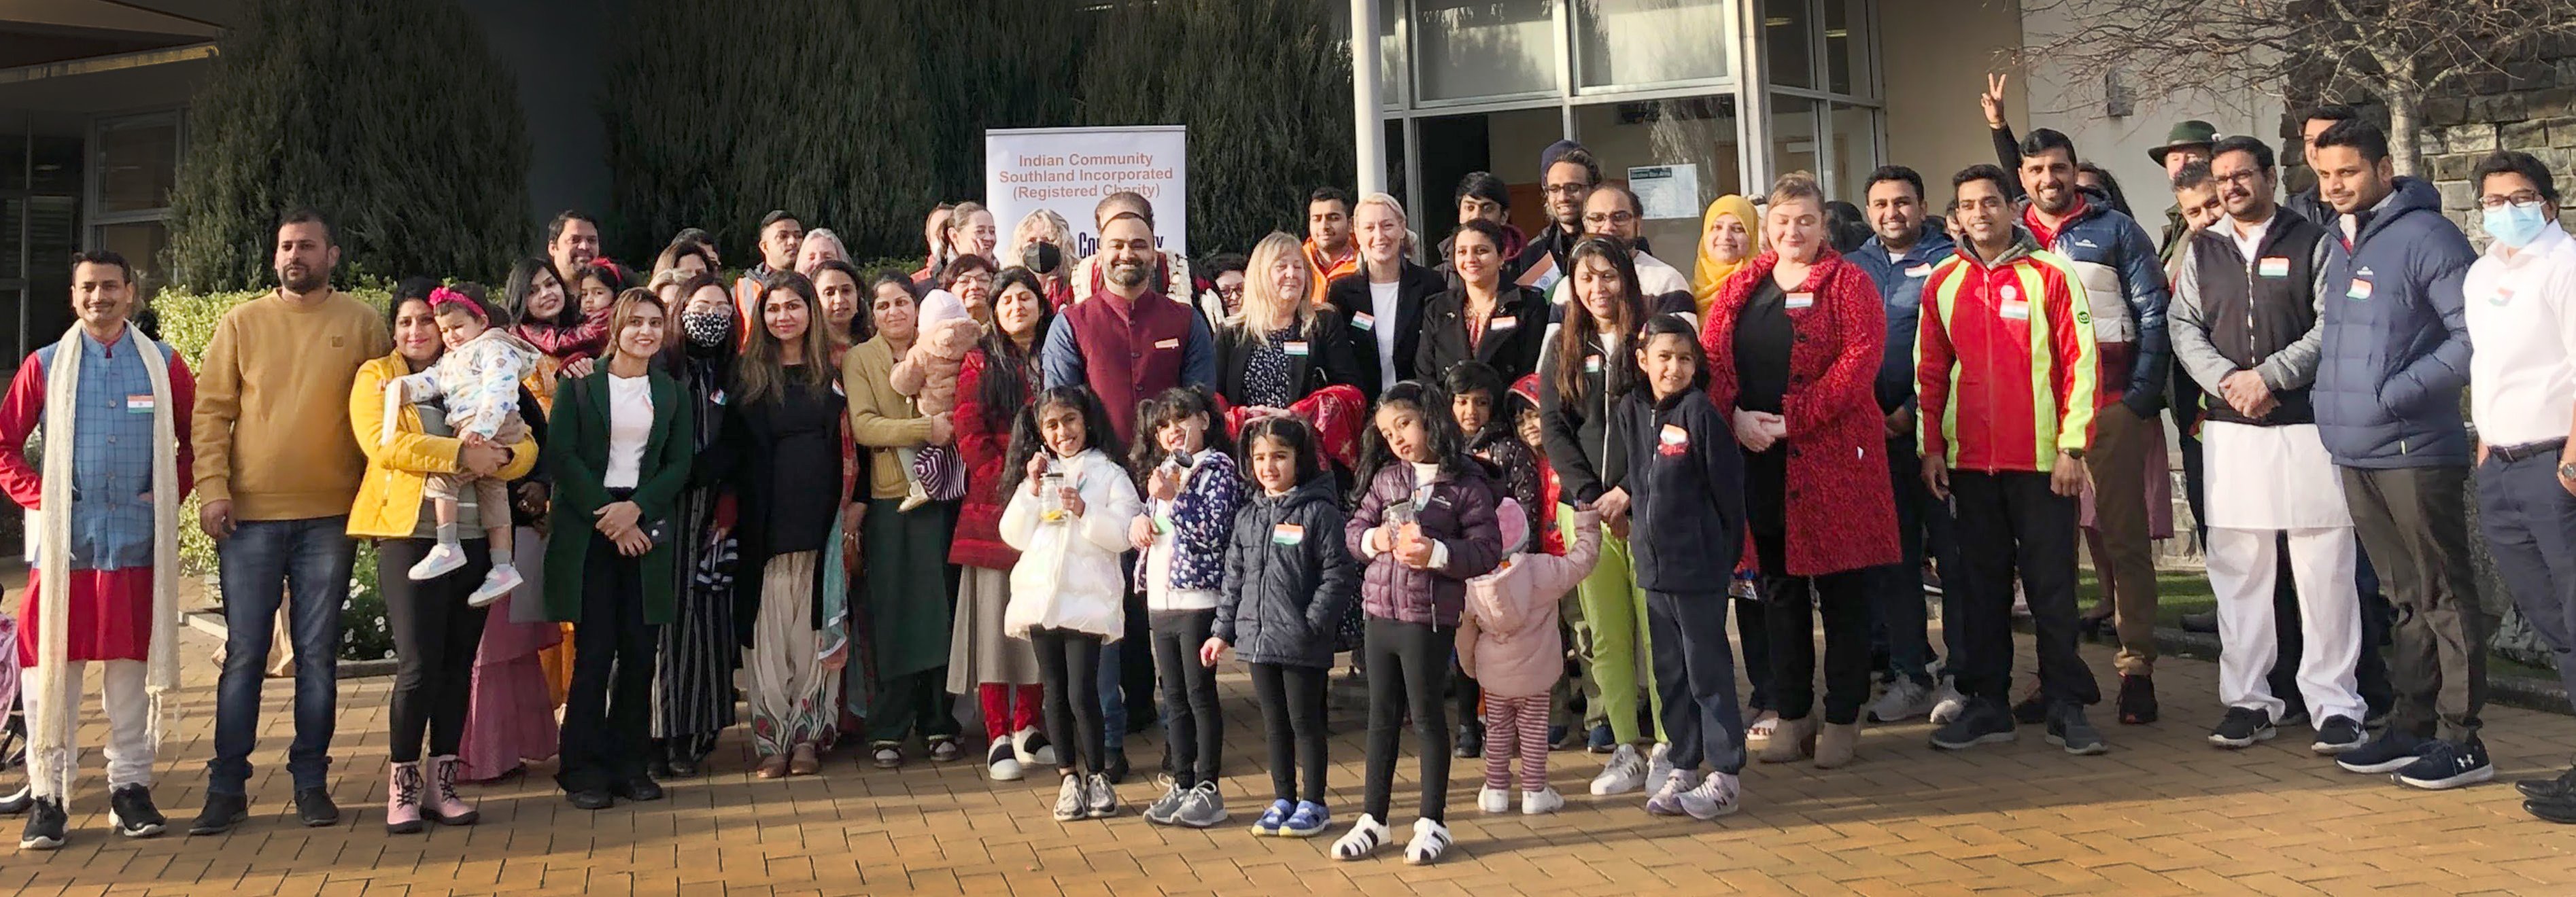 The Indian community in Southland celebrated India’s independence day with a flag ceremony at the...